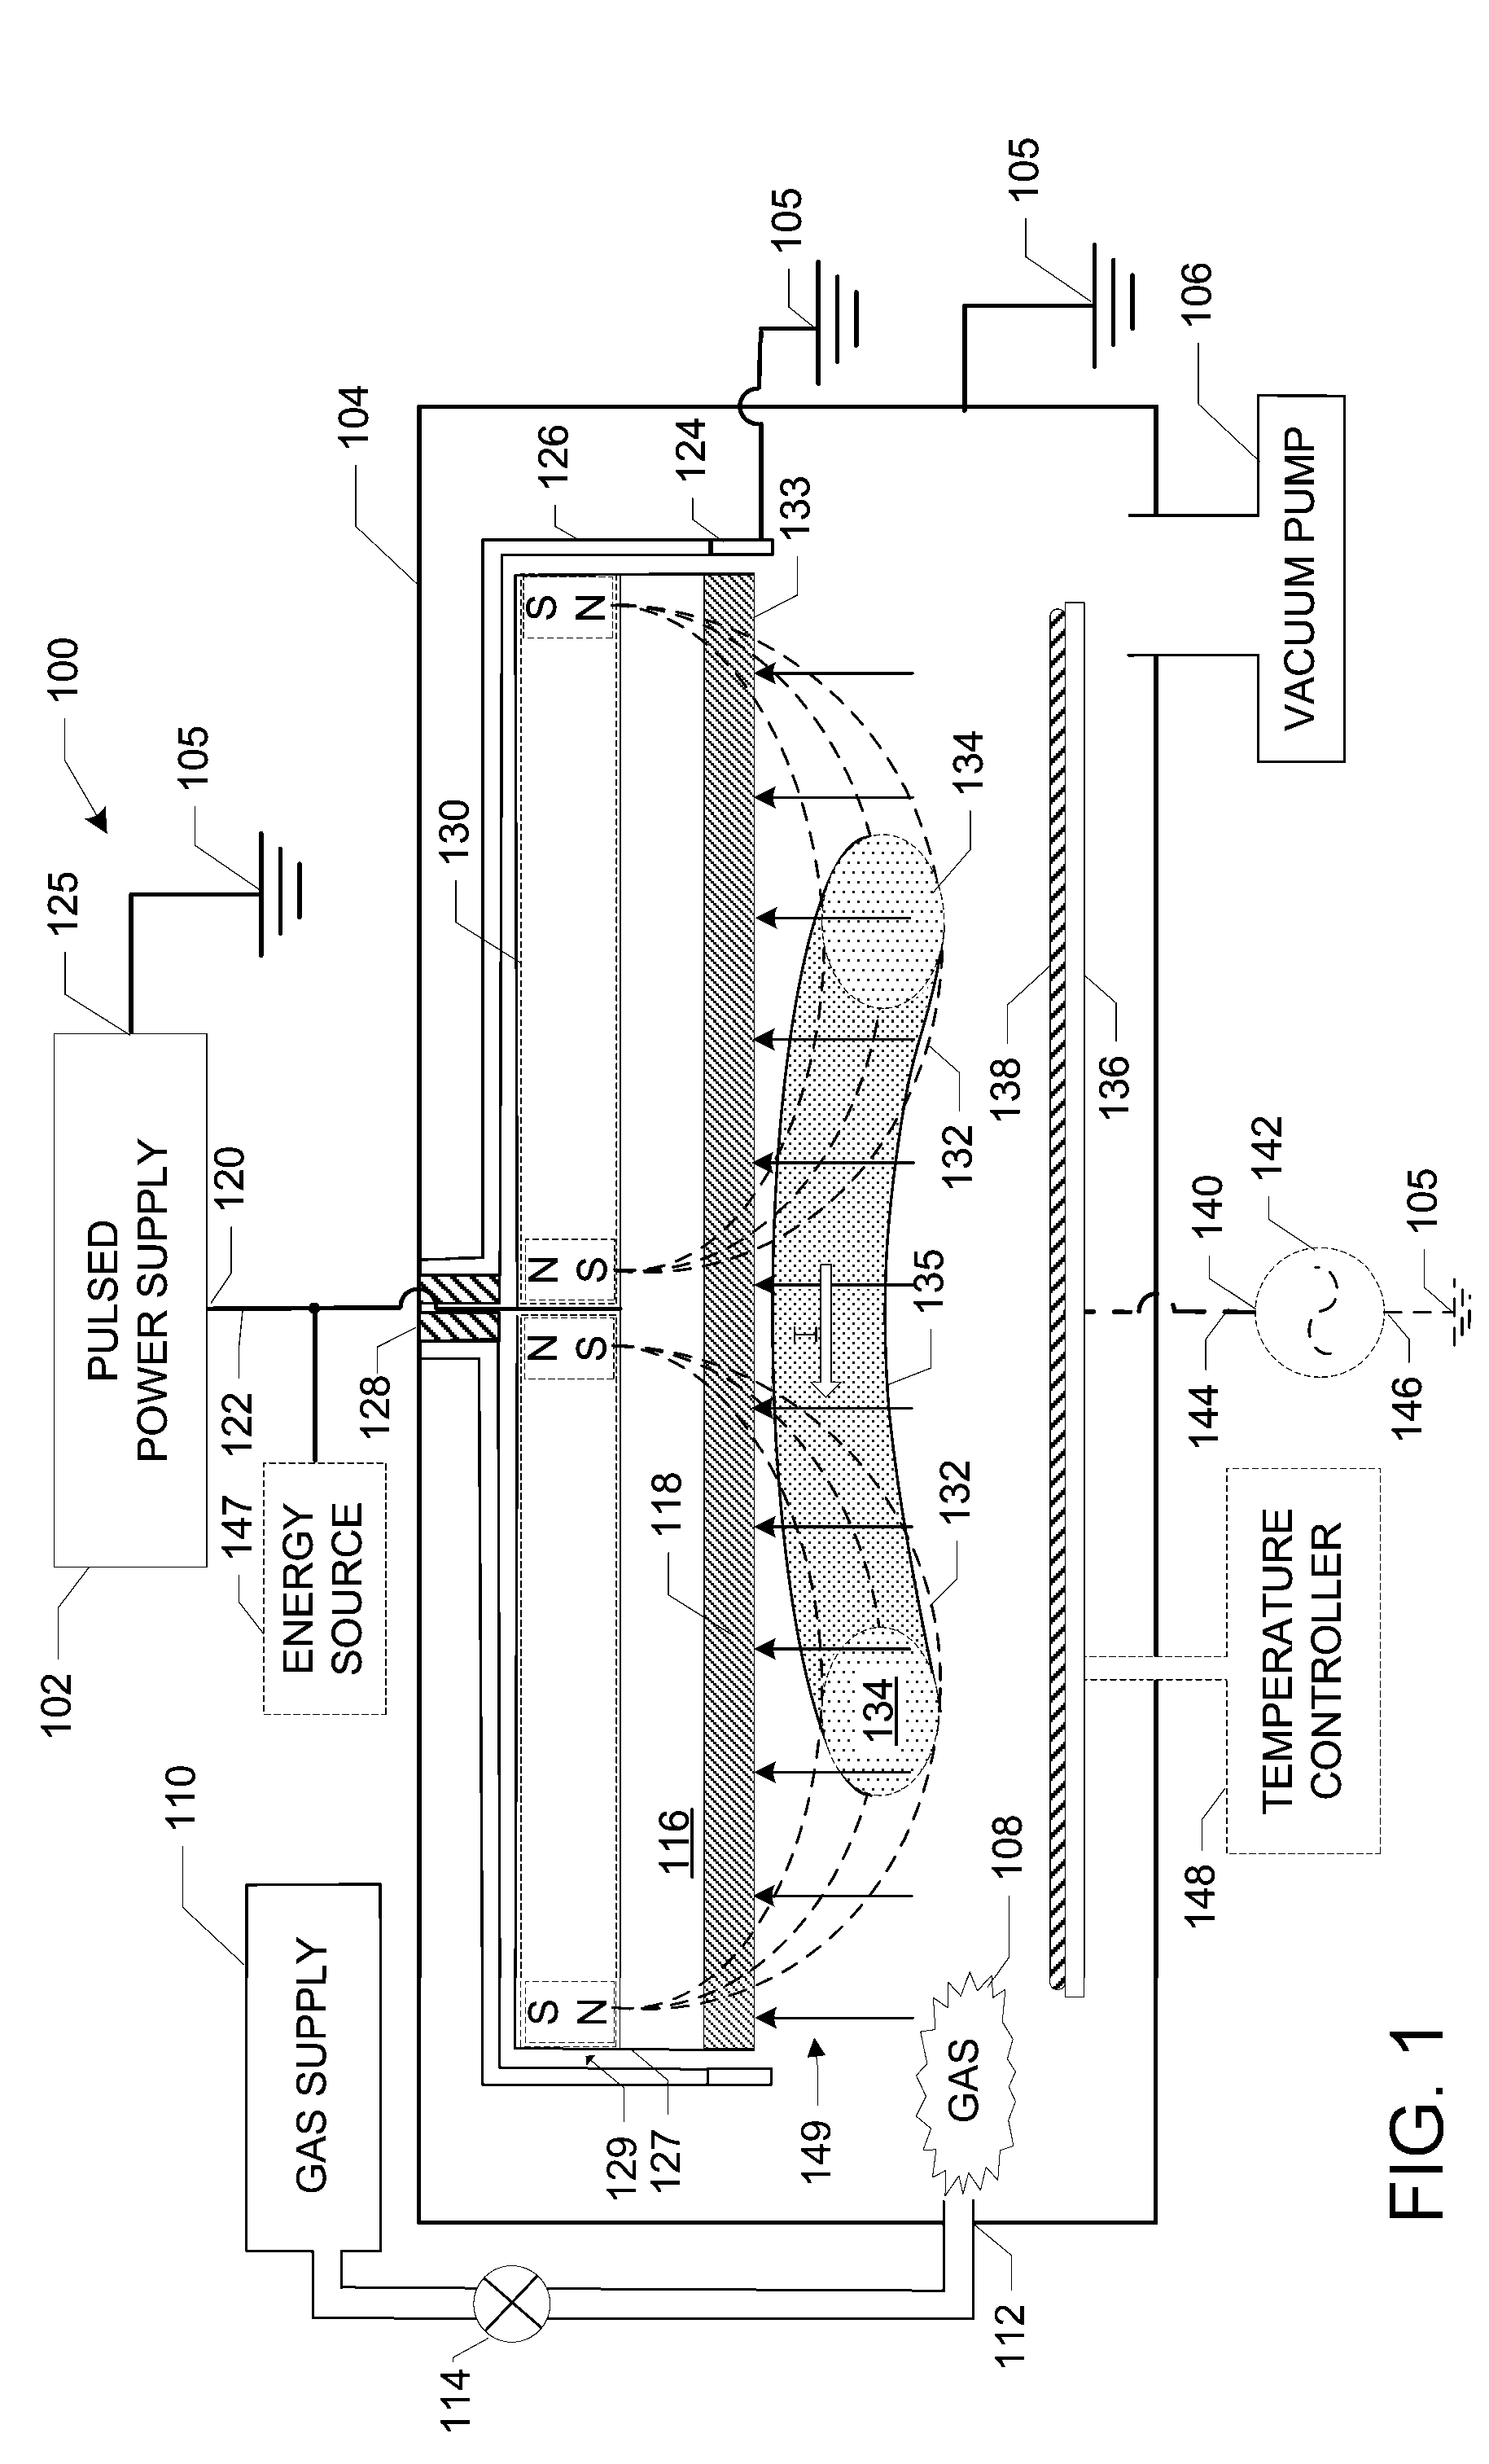 Methods and Apparatus for Generating Strongly-Ionized Plasmas with Ionizational Instabilities